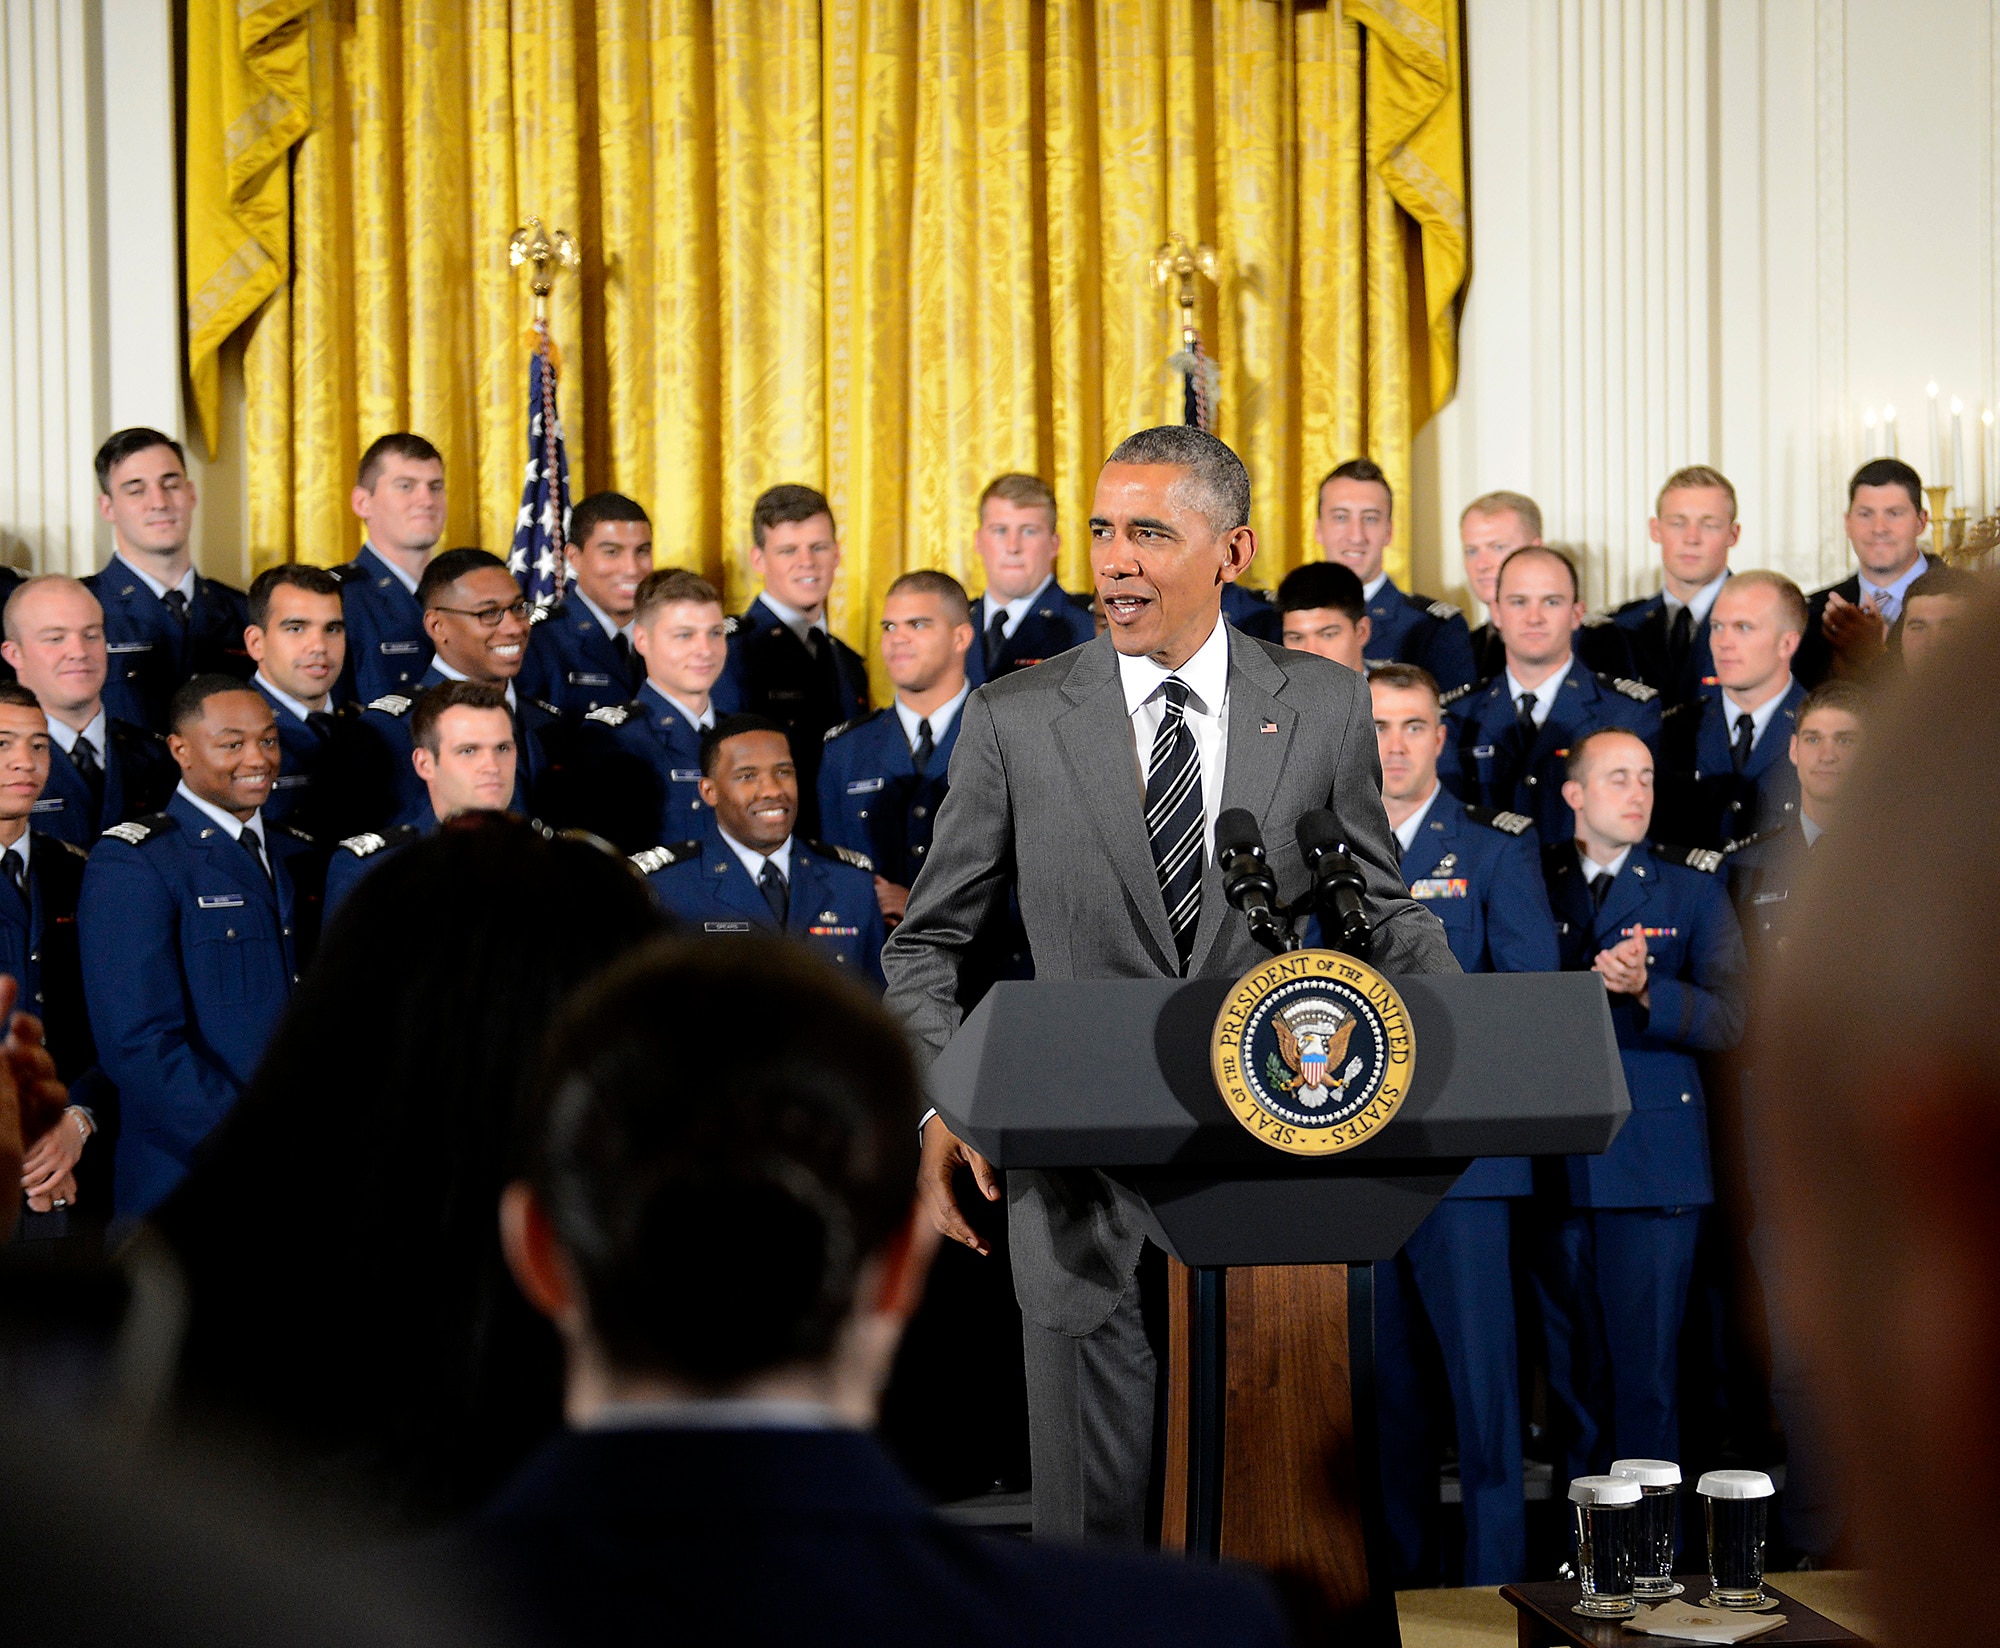 President Barack Obama congratulates the U.S. Air Force Academy football team with the Commander-in-Chief's Trophy at the White House May 7, 2015. With the team were Lt. Gen. Michelle D. Johnson, the superintendent of the Academy, and Air Force Chief of Staff Gen. Mark A. Welsh III. (U.S. Air Force photo/Scott M. Ash)